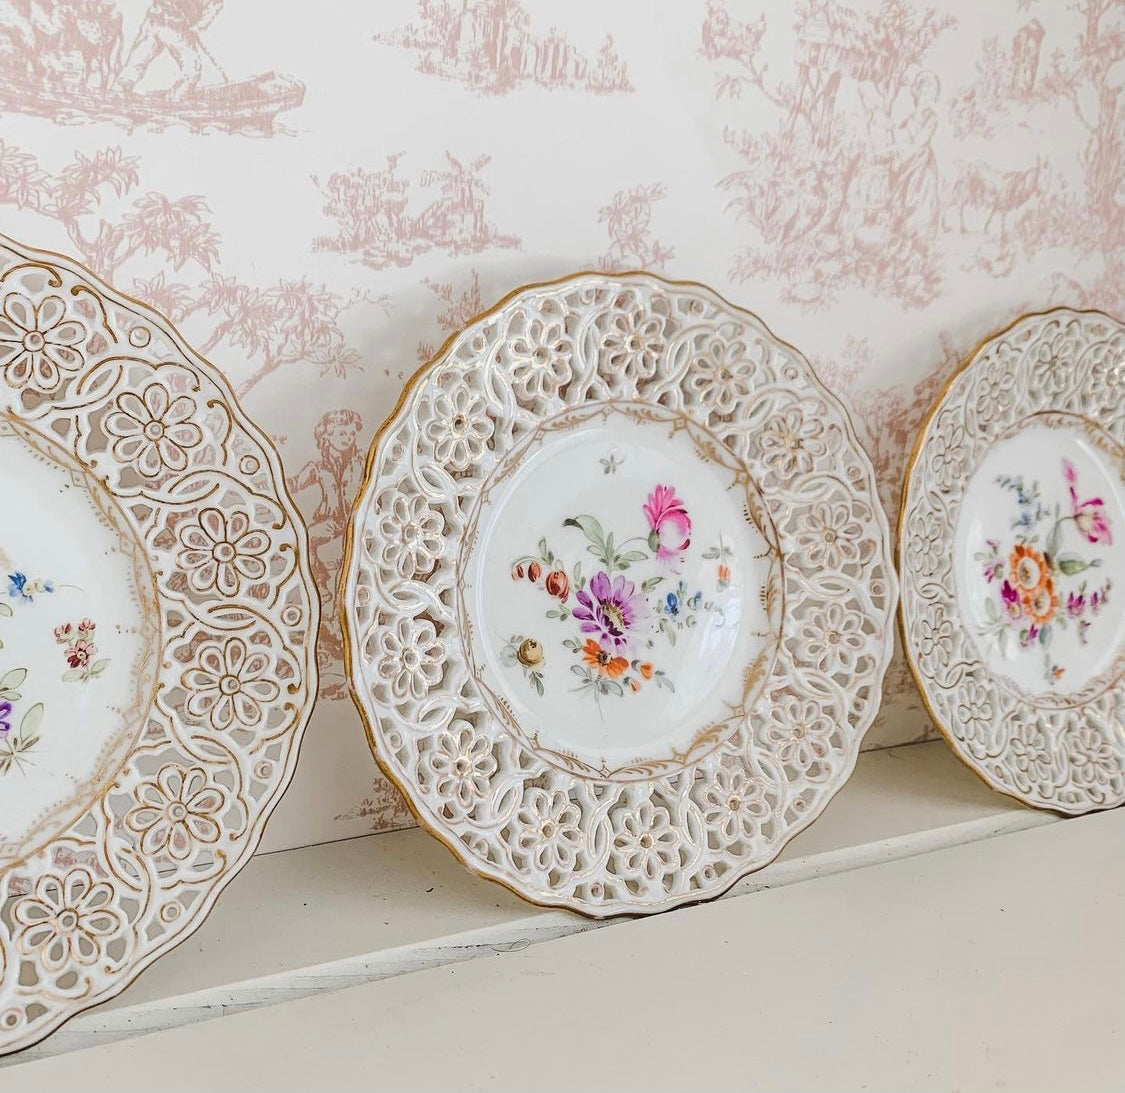 Set of Captivating Dresden Hand-Painted Plates made in Germany